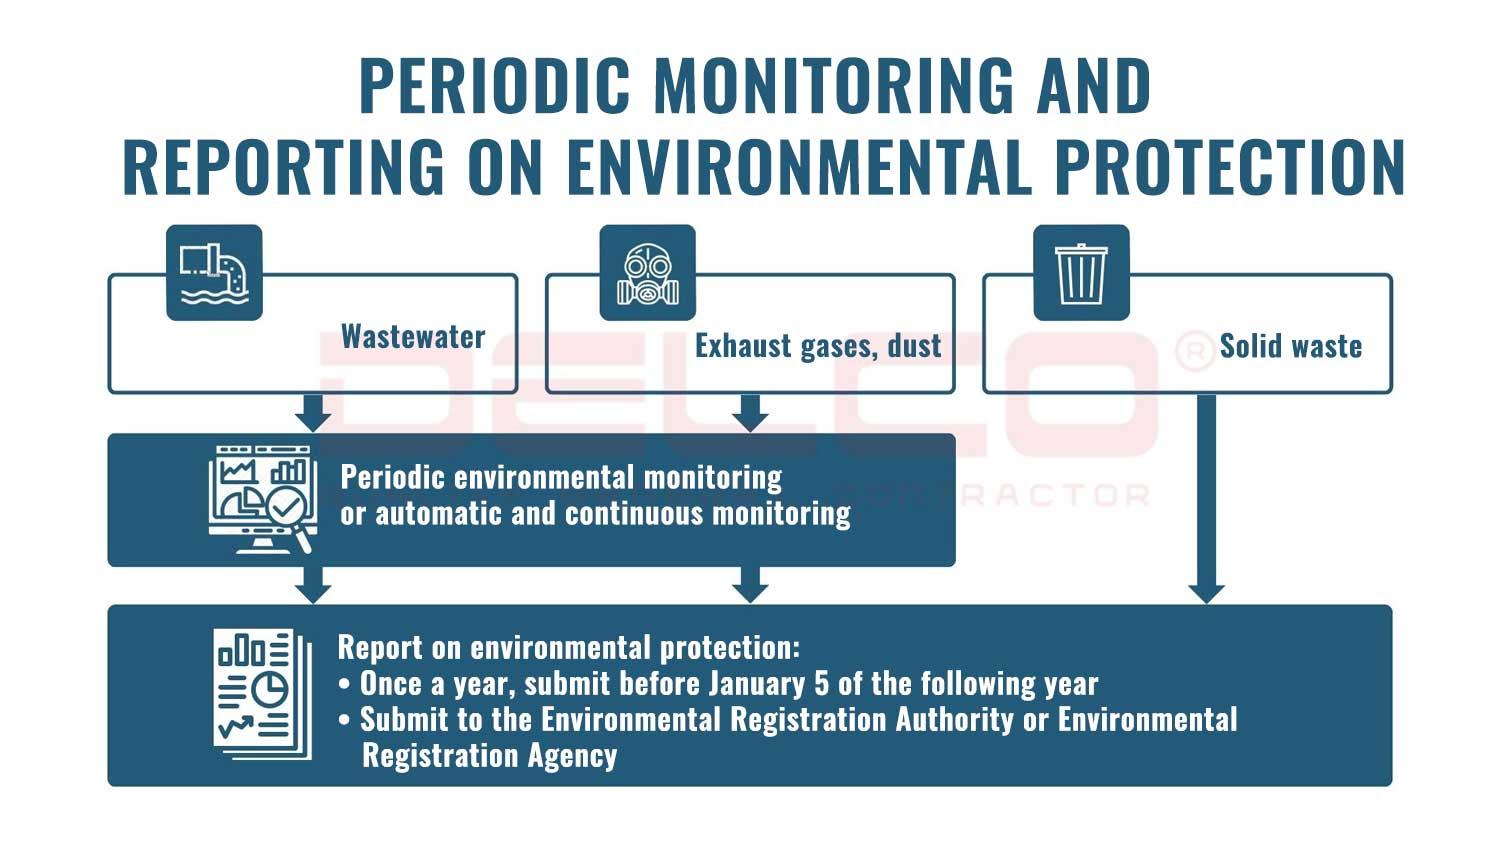 PERIODIC MONITORING AND REPORTING ON ENVIRONMENTAL PROTECTION